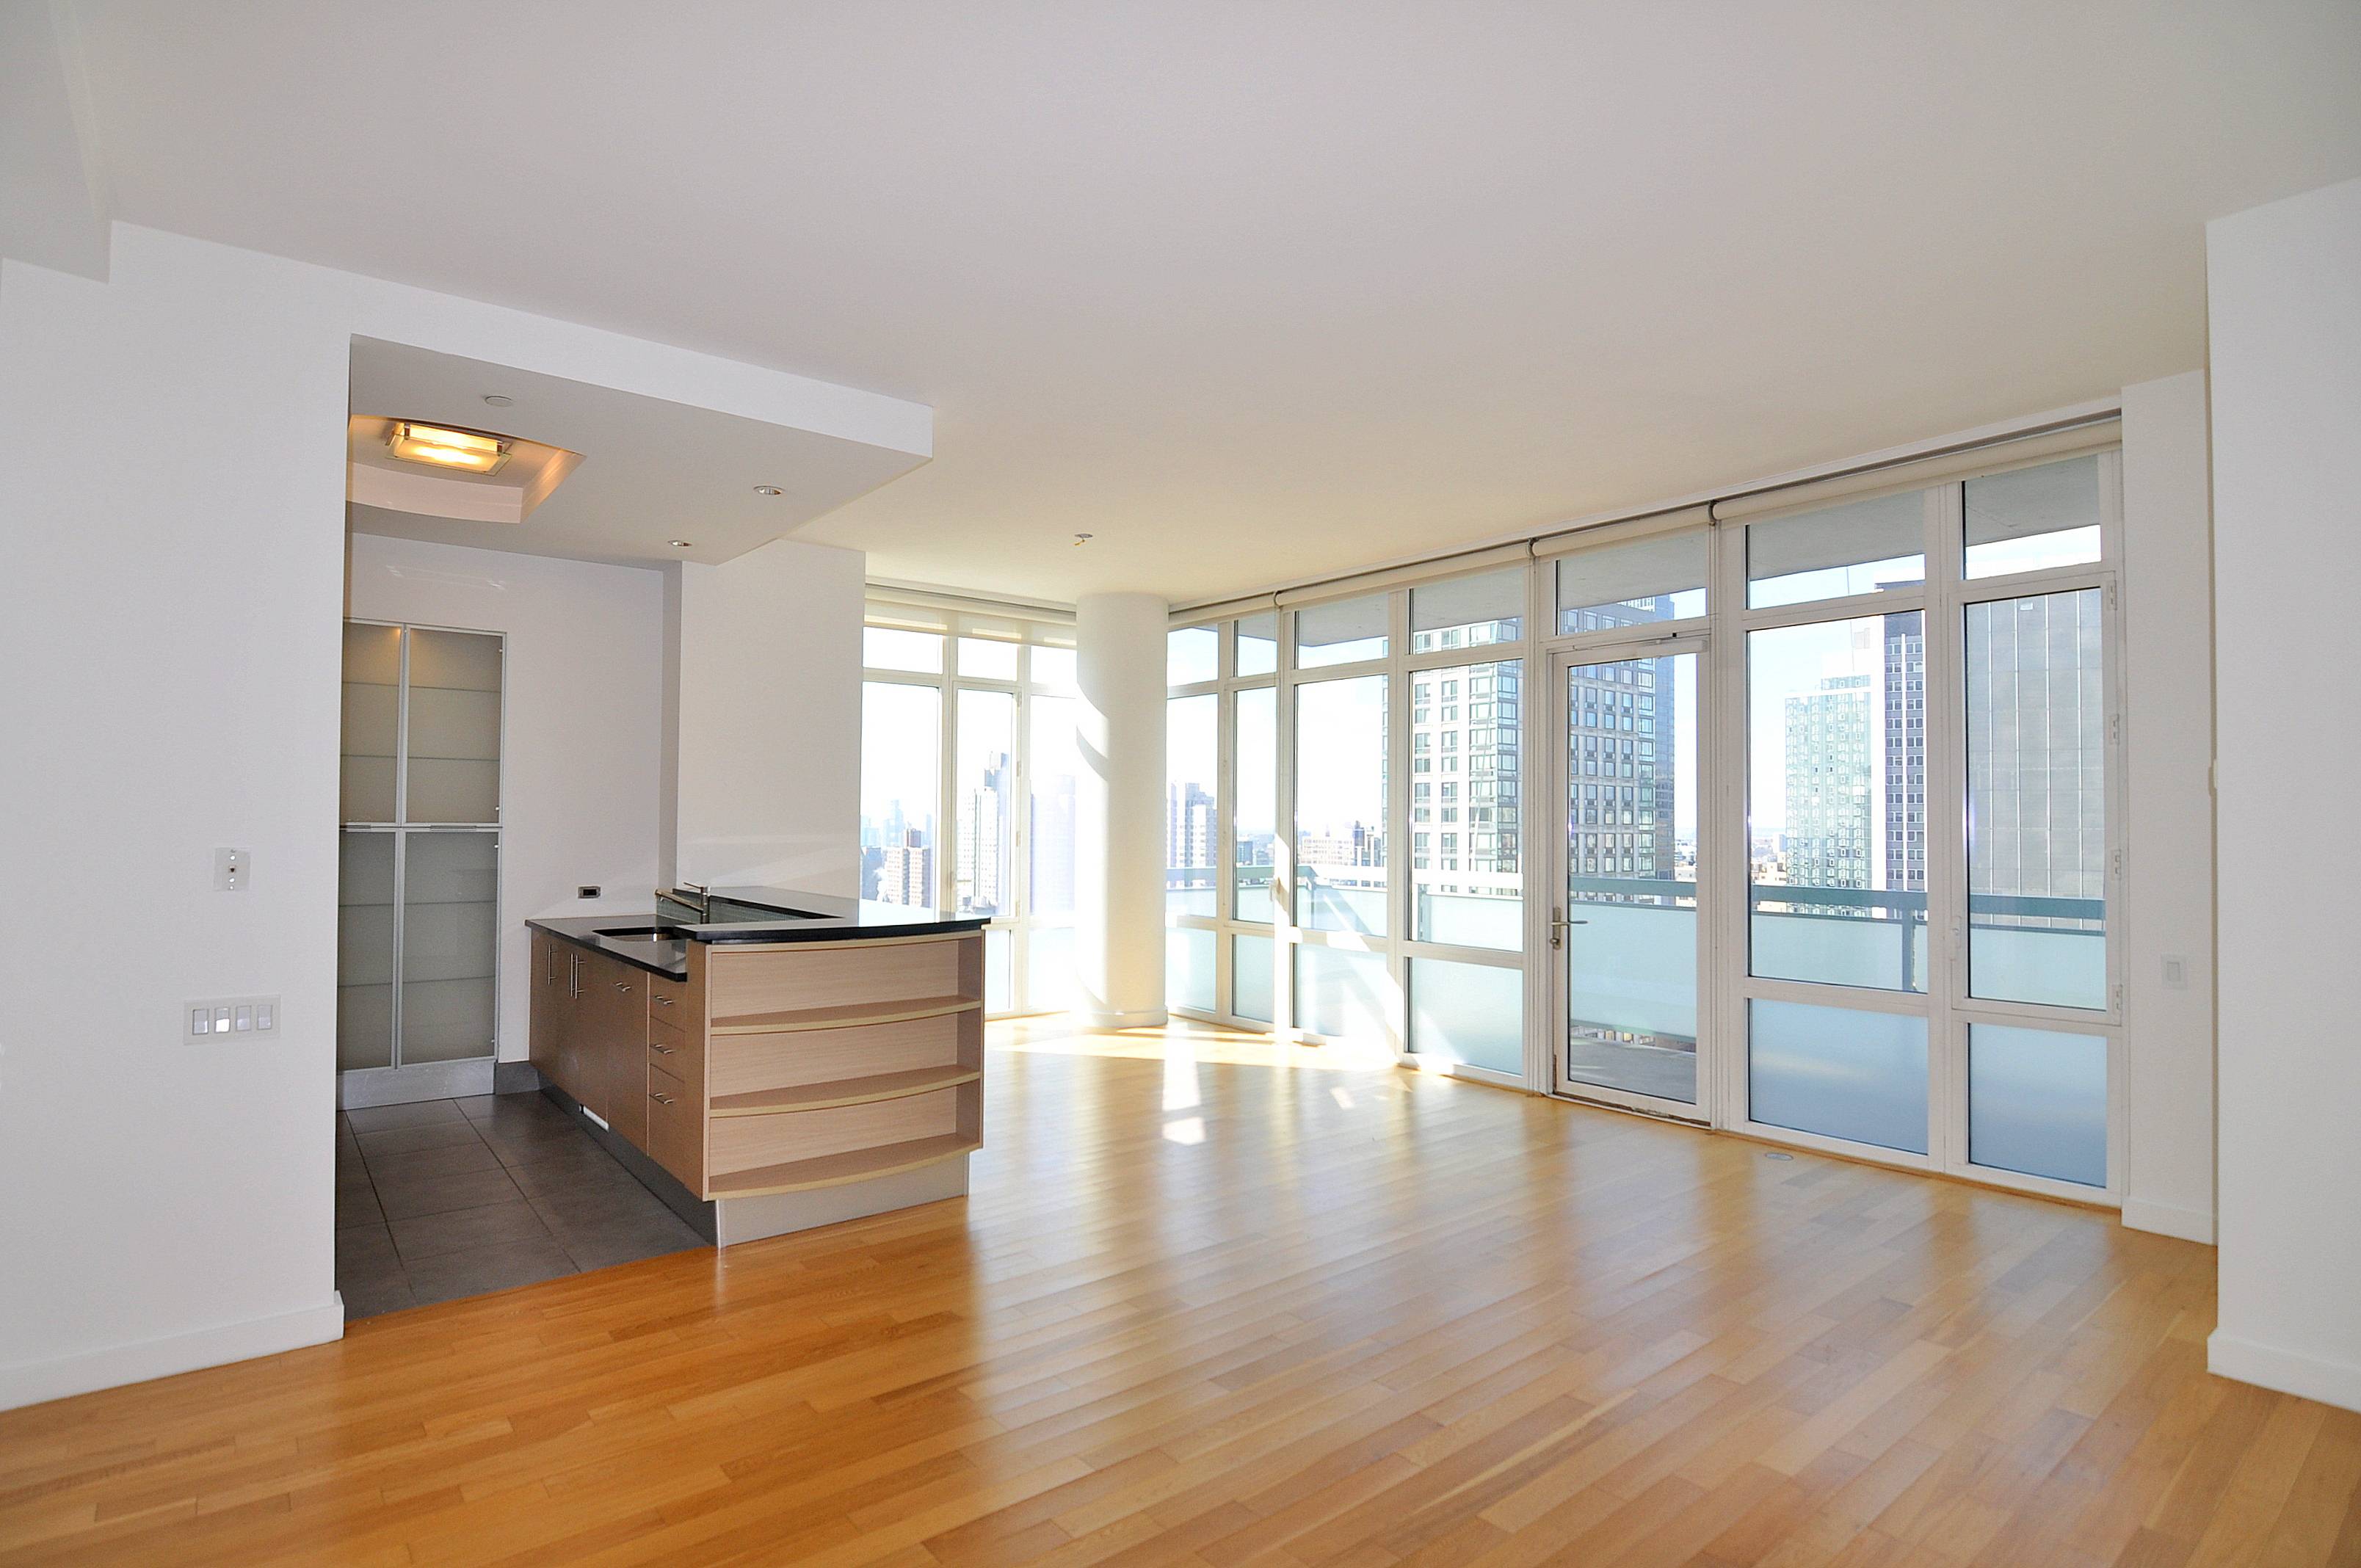 NEW TO MARKET! High Floor 2 Bedroom Residence with Balcony & Empire State Views!